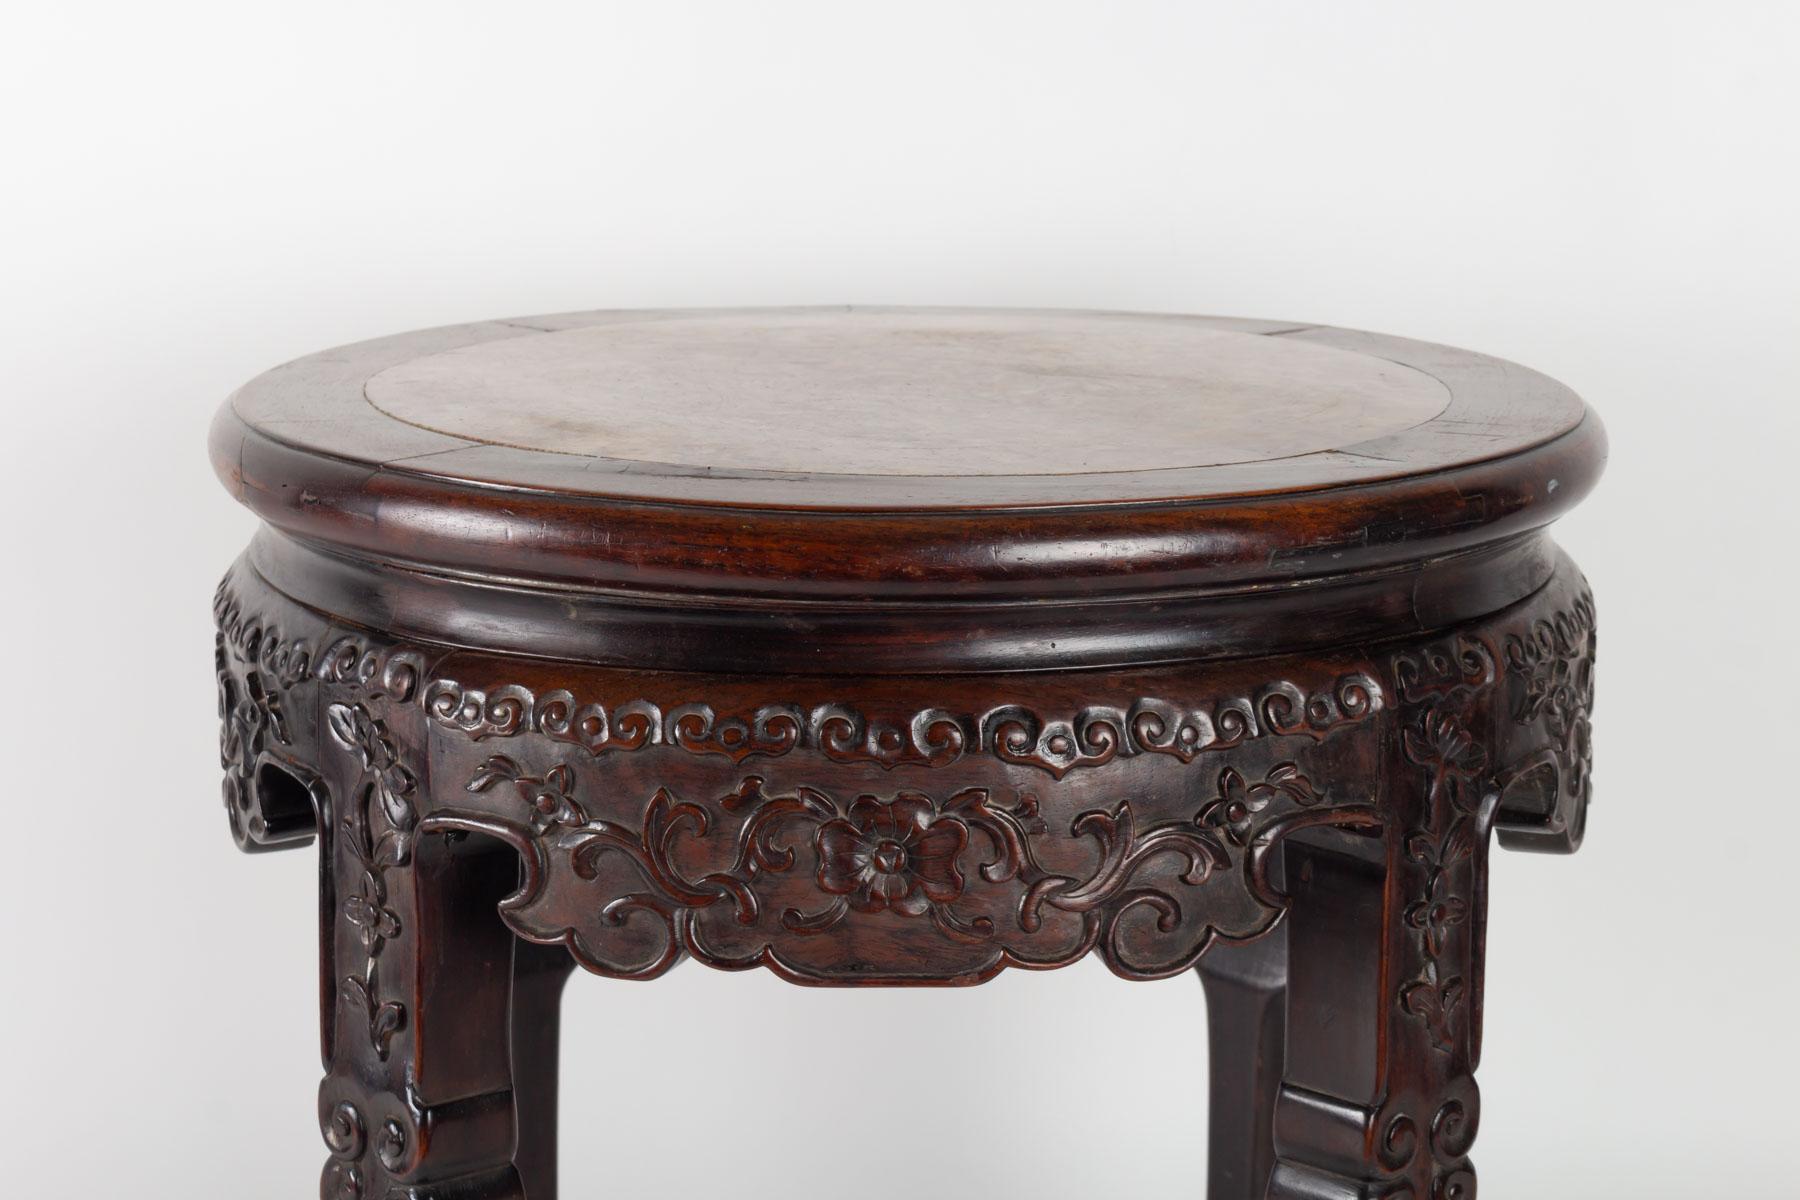 Small exotic wooden table very dense carved with floral patterns, China, 19th century, 1880
Measures: H 46cm, D 44cm.